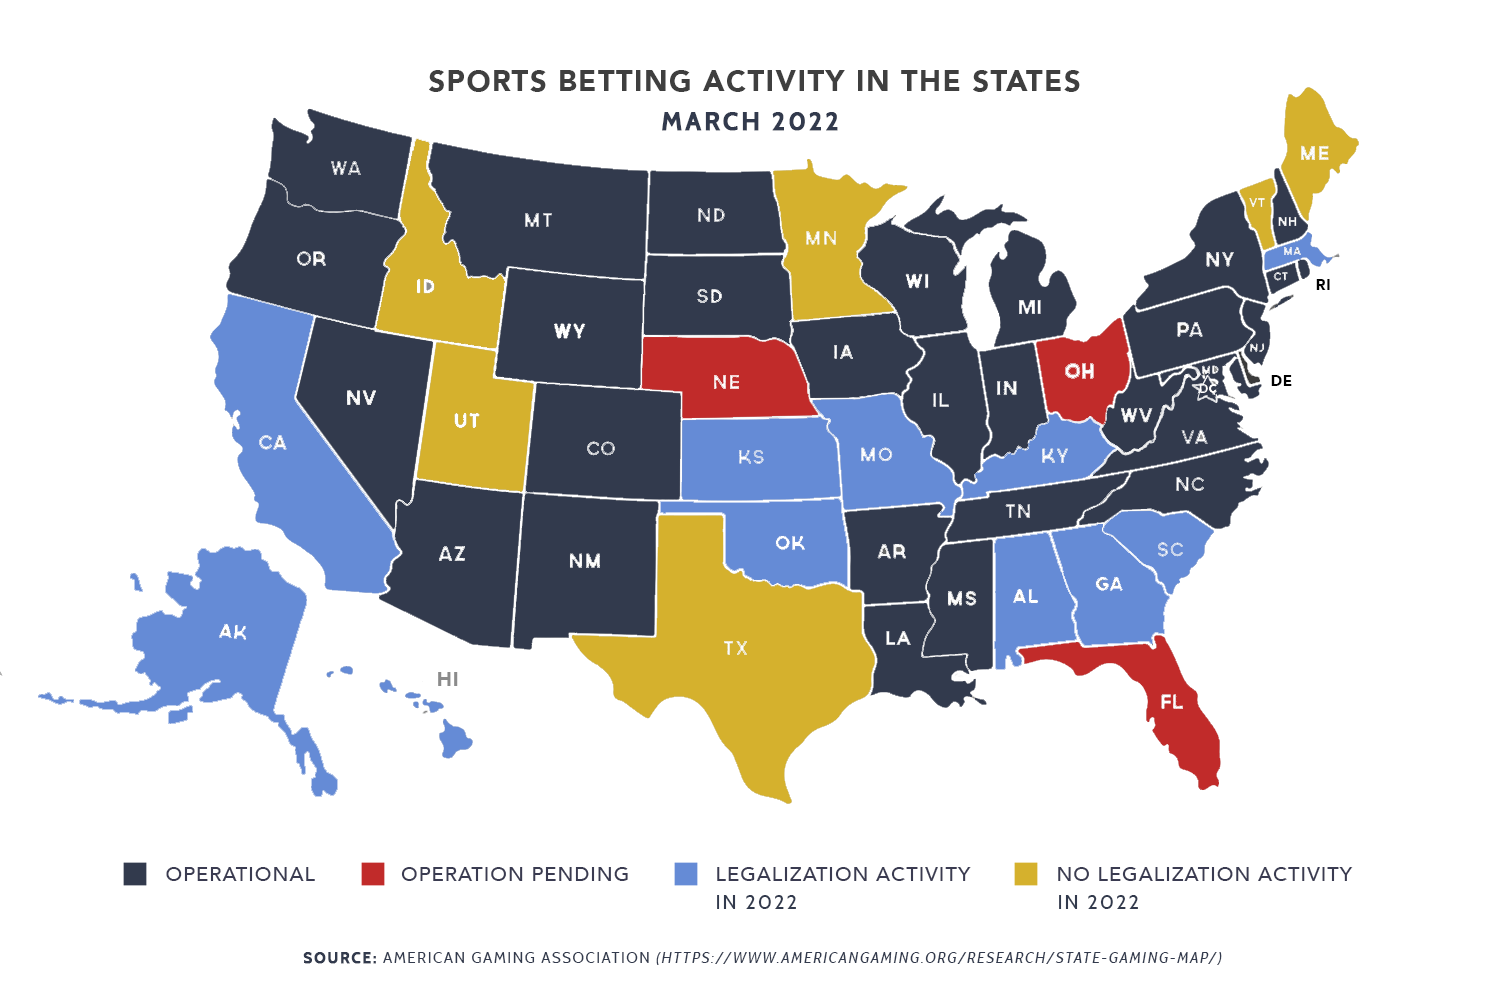 What states are sportsbooks legal btc fork meaning